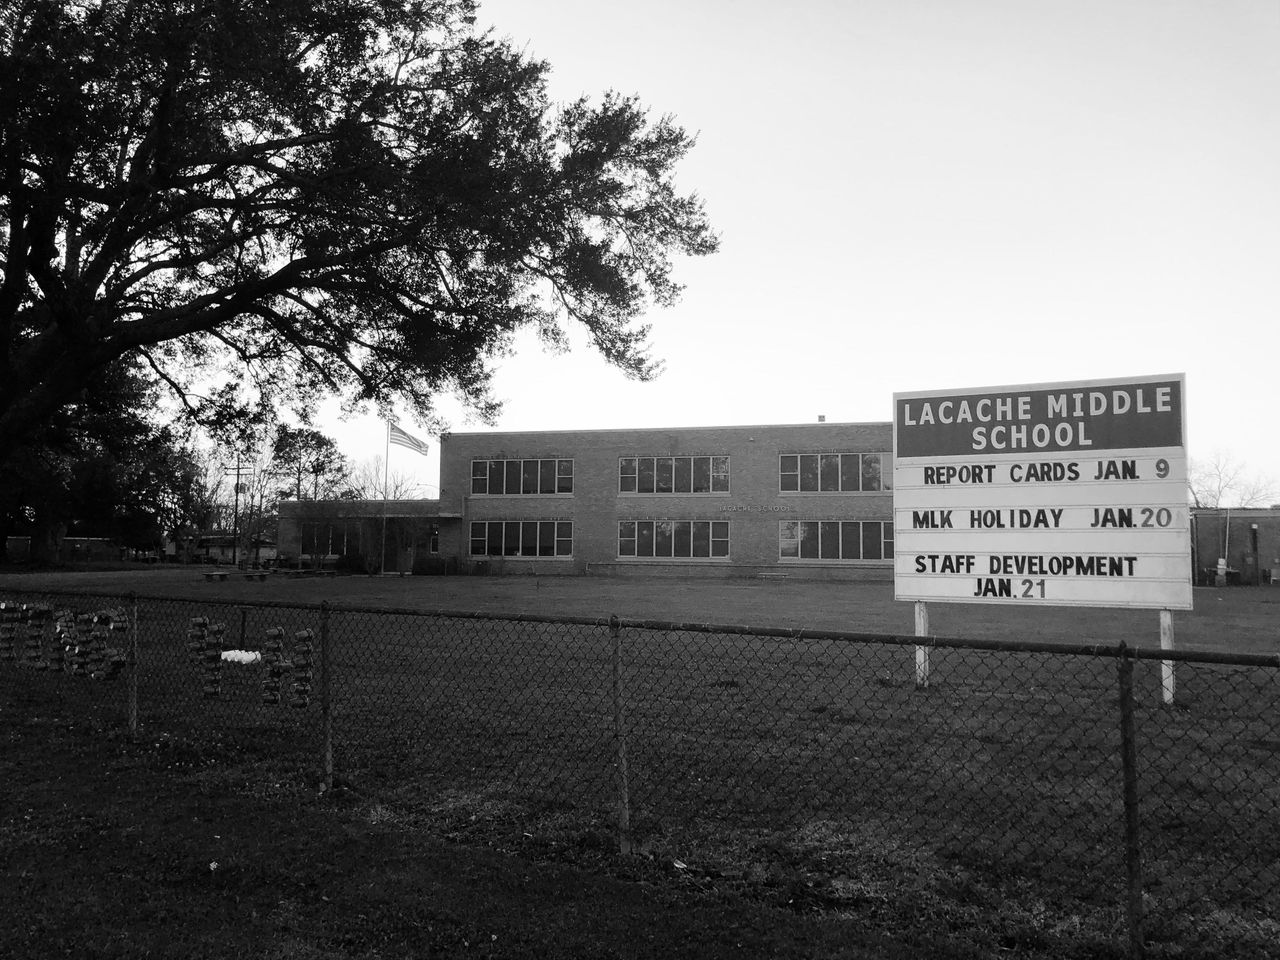 Lacache Middle School in Chauvin, Louisiana, loses students each year as their families move to less flood-prone areas.